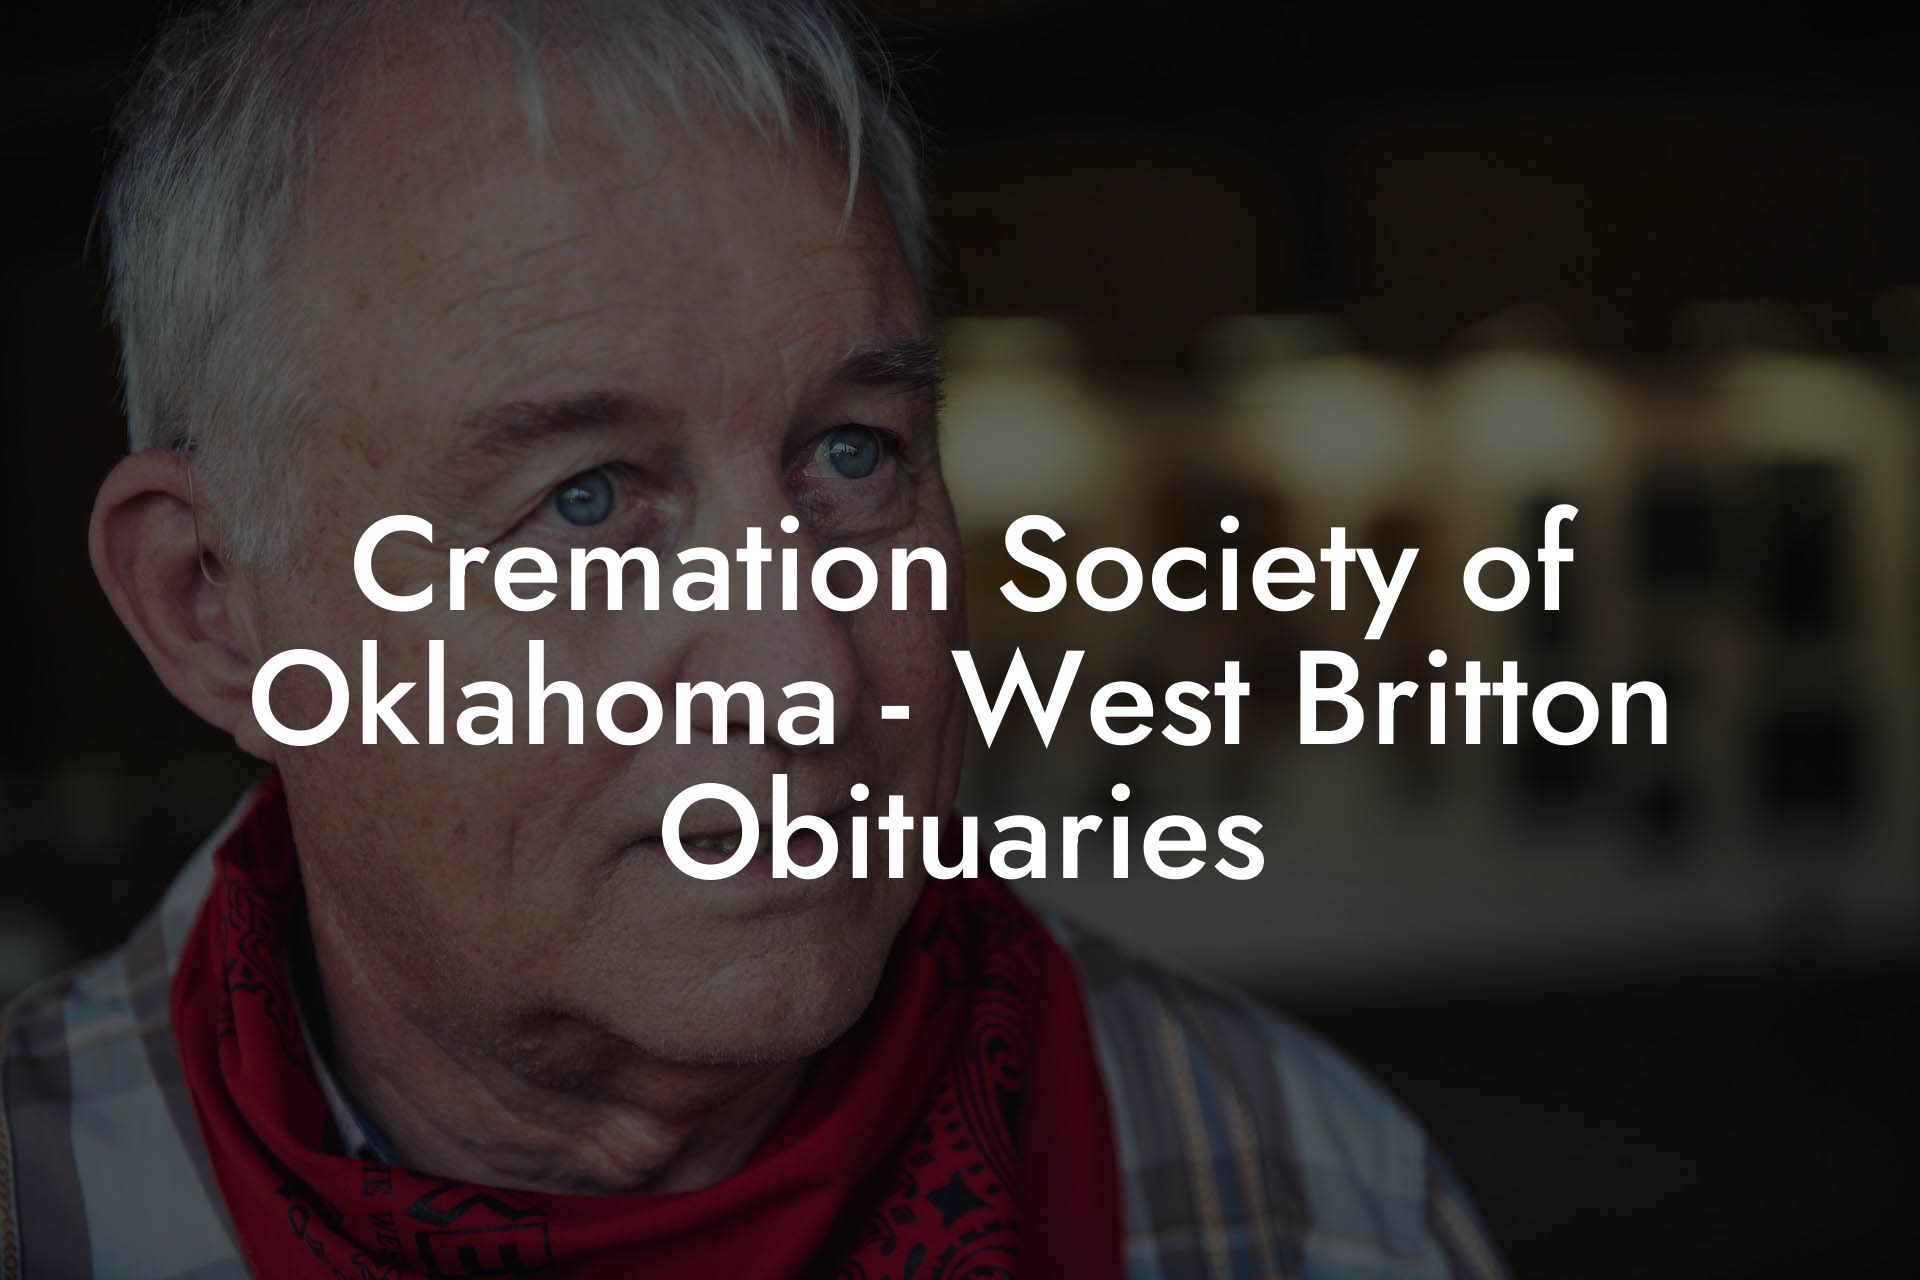 Cremation Society of Oklahoma - West Britton Obituaries